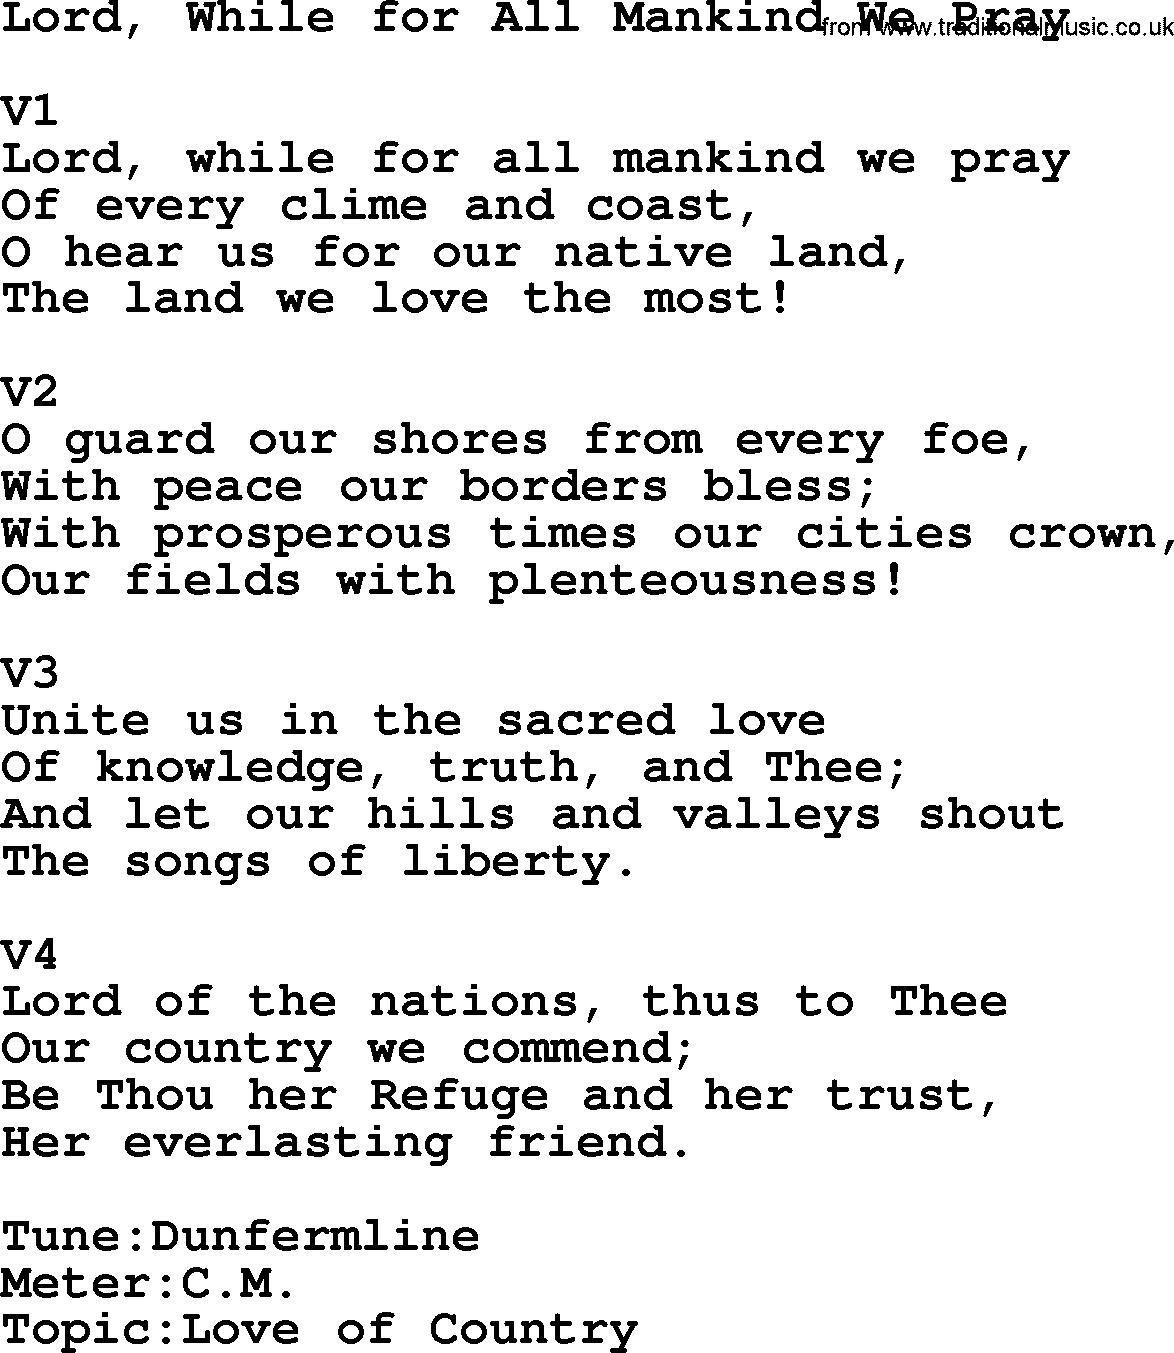 Adventist Hynms collection, Hymn: Lord, While For All Mankind We Pray, lyrics with PDF